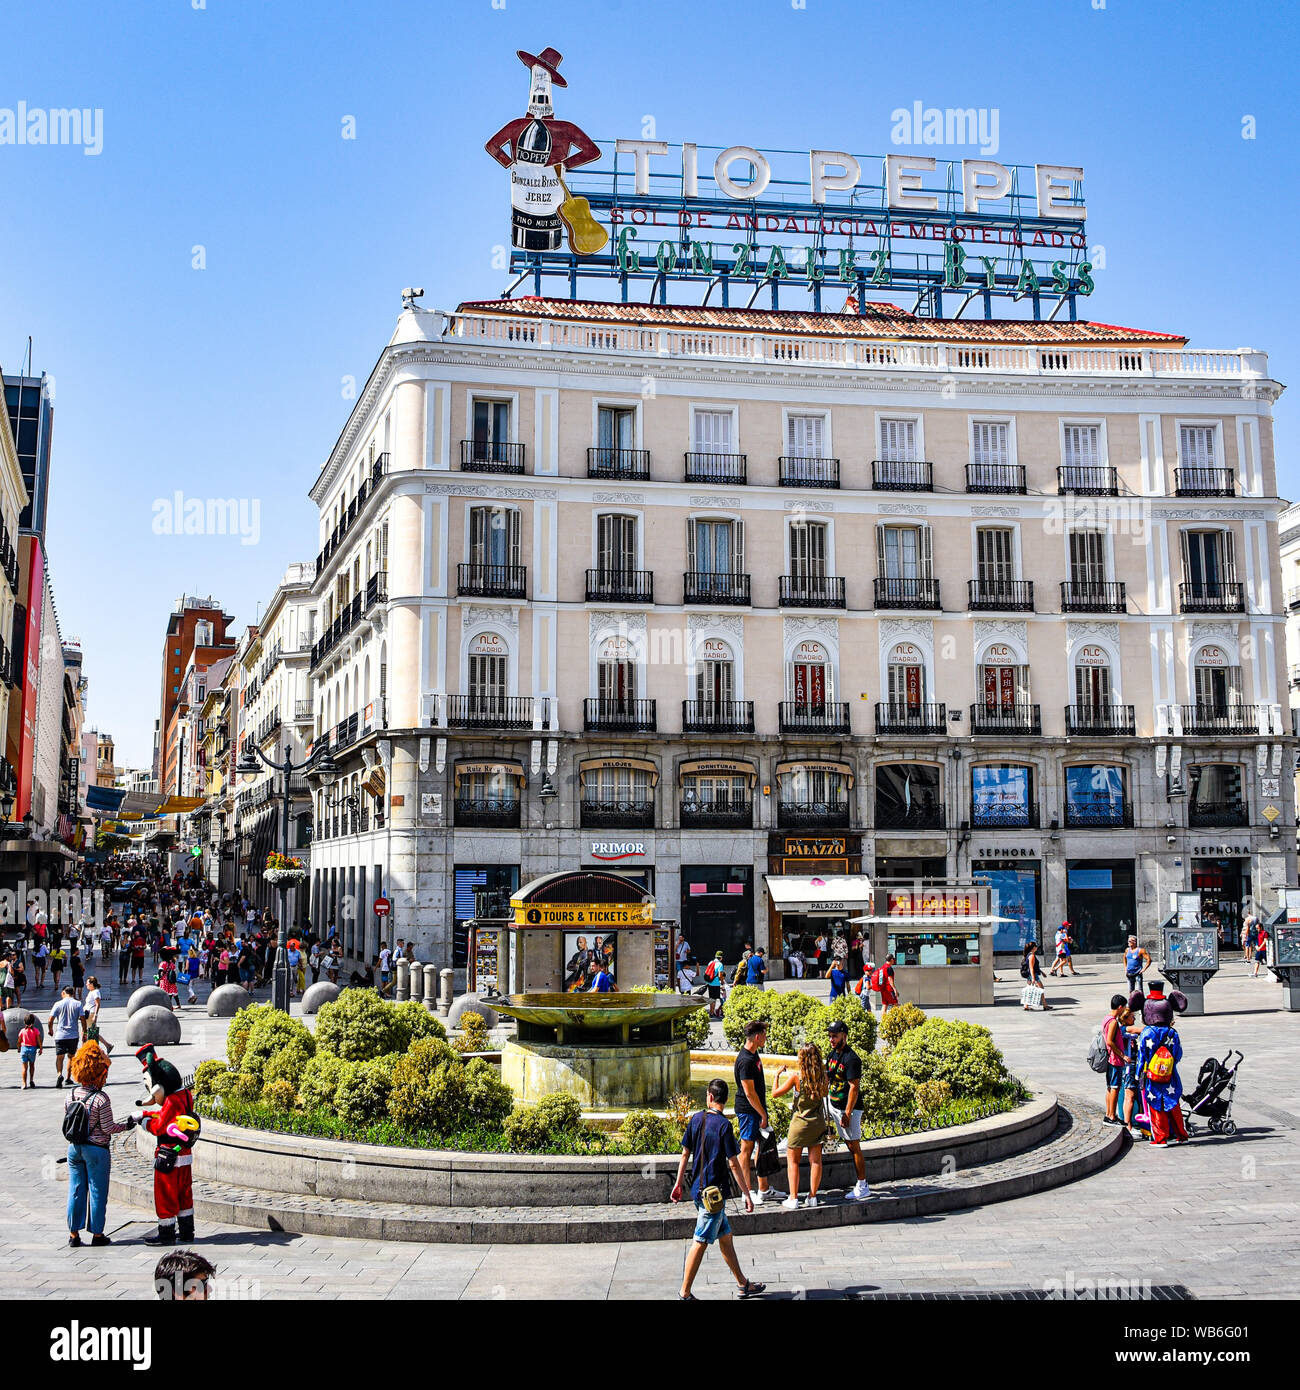 Madrid, Spain -July 22, 2019: Neon sign above Puerta del Sol public square Stock Photo